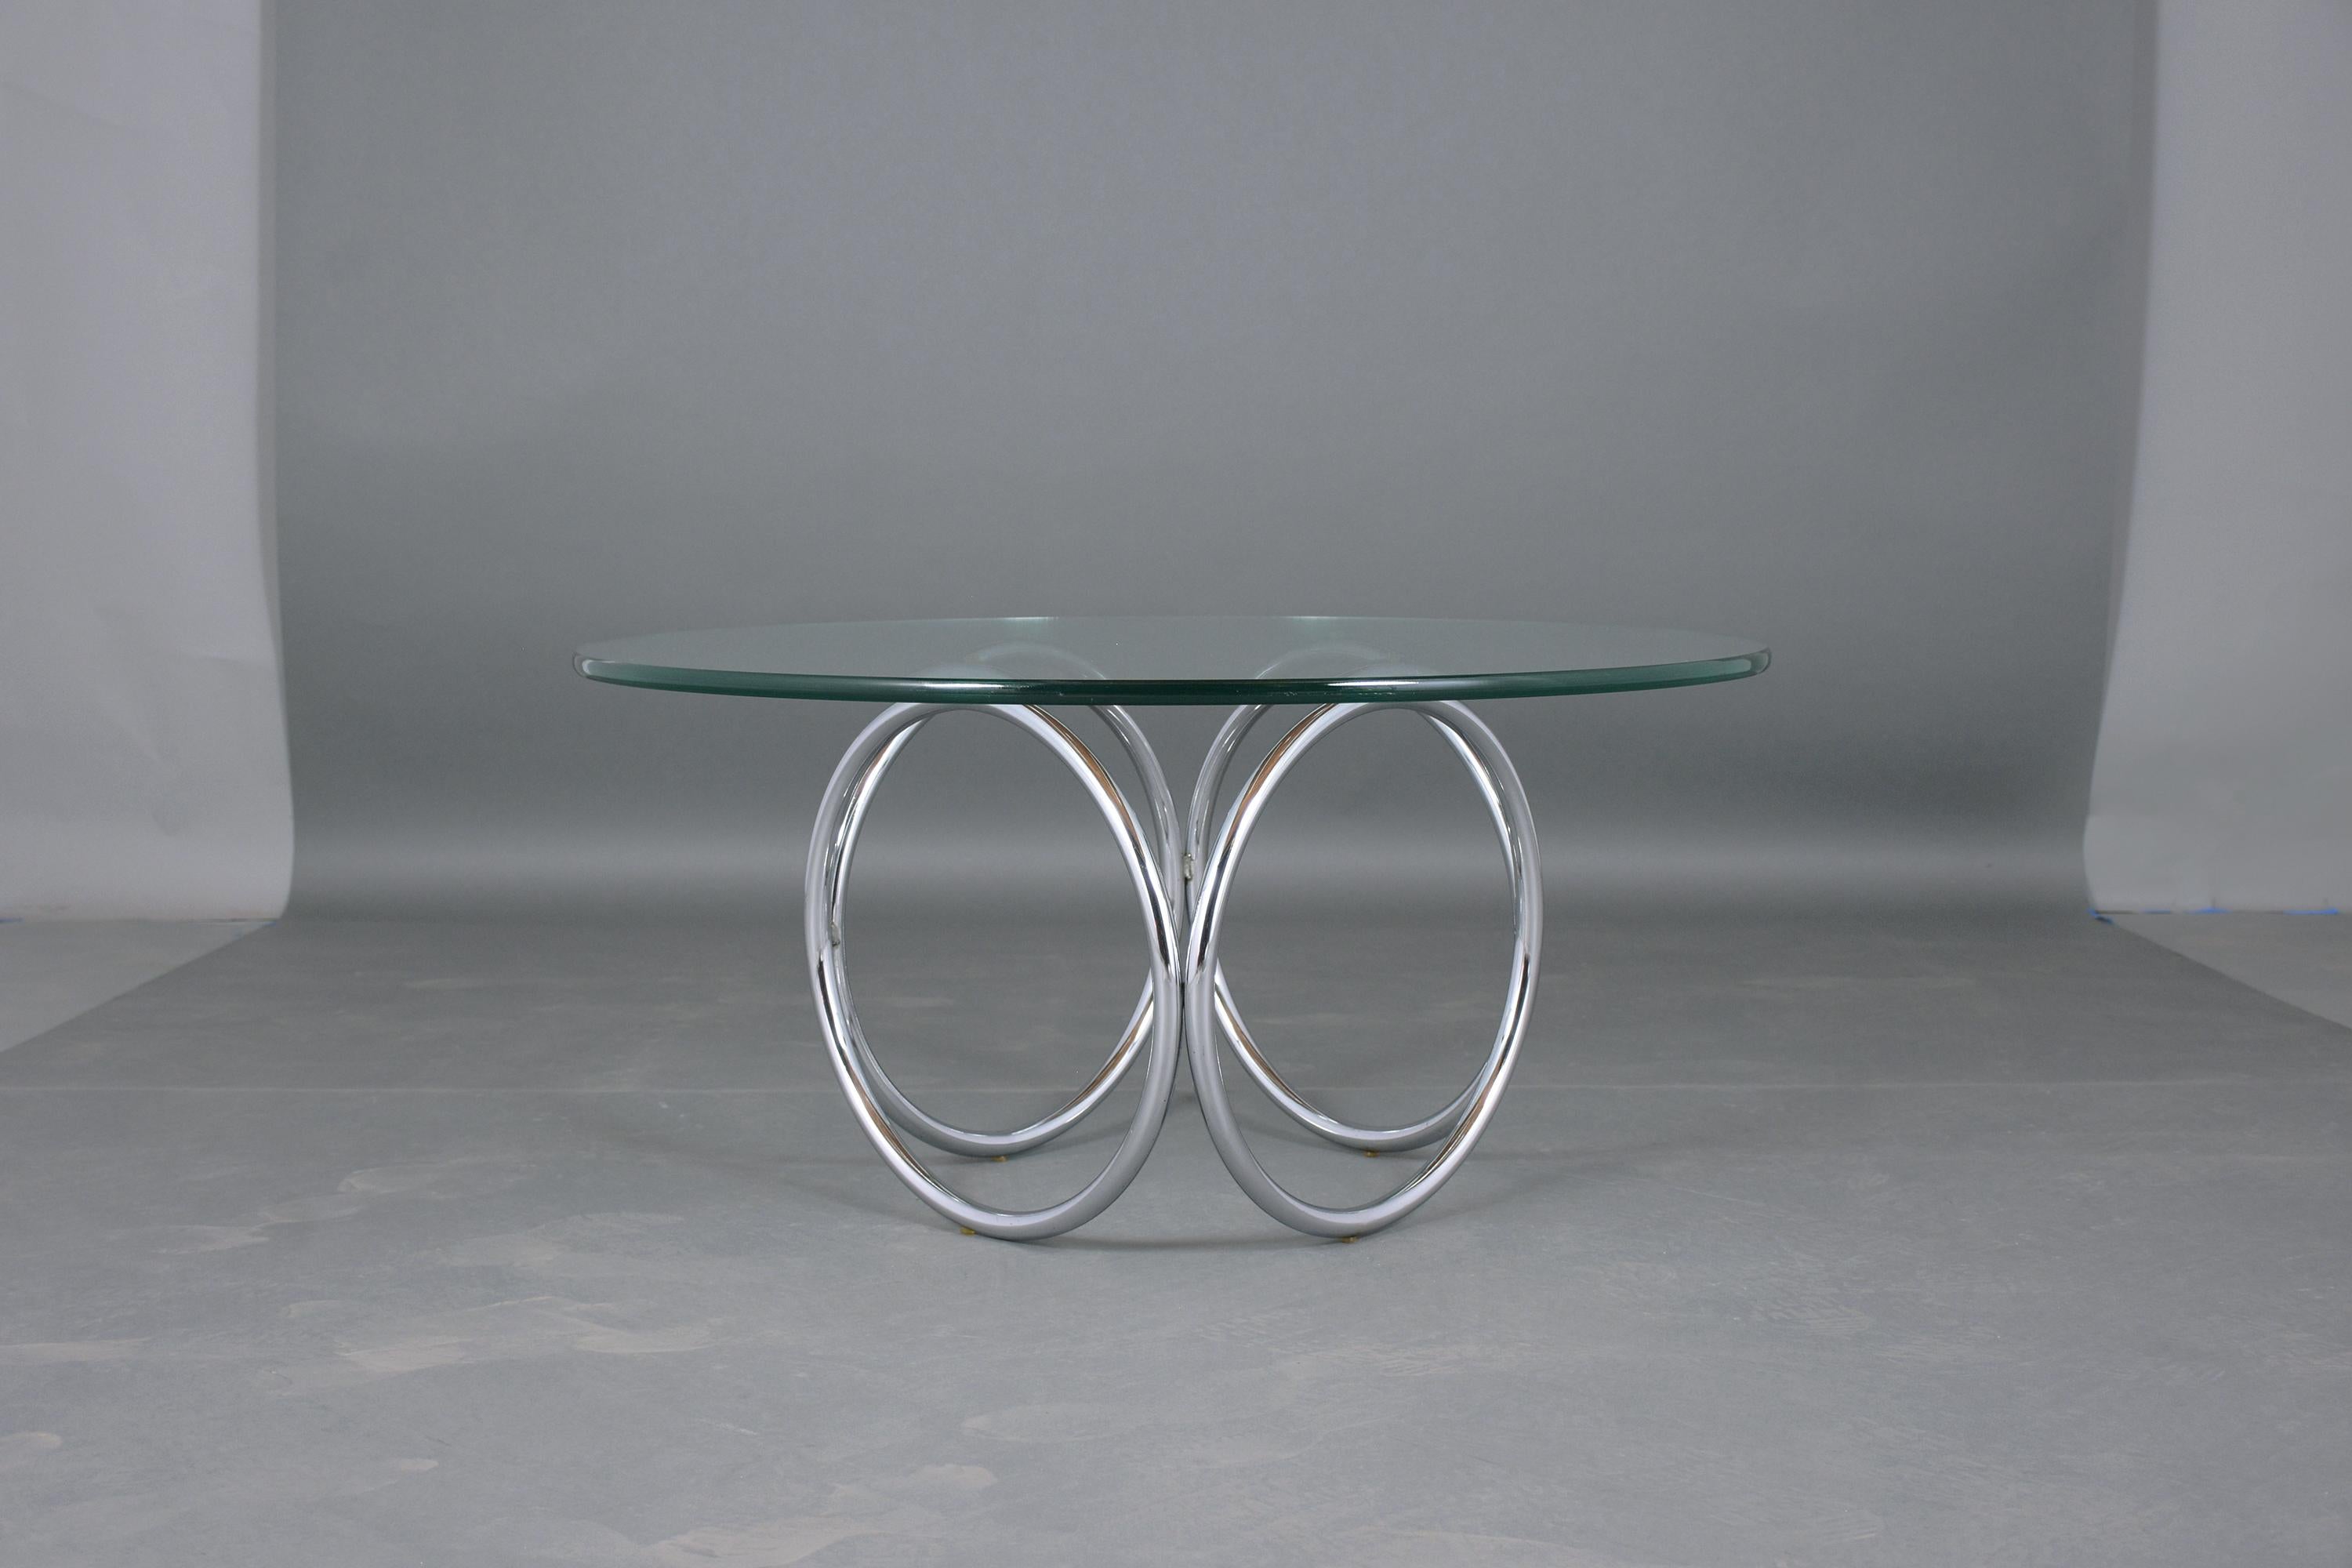 American Restored Vintage 1960s Mid-Century Modern Chrome Side Table with Round Glass Top For Sale